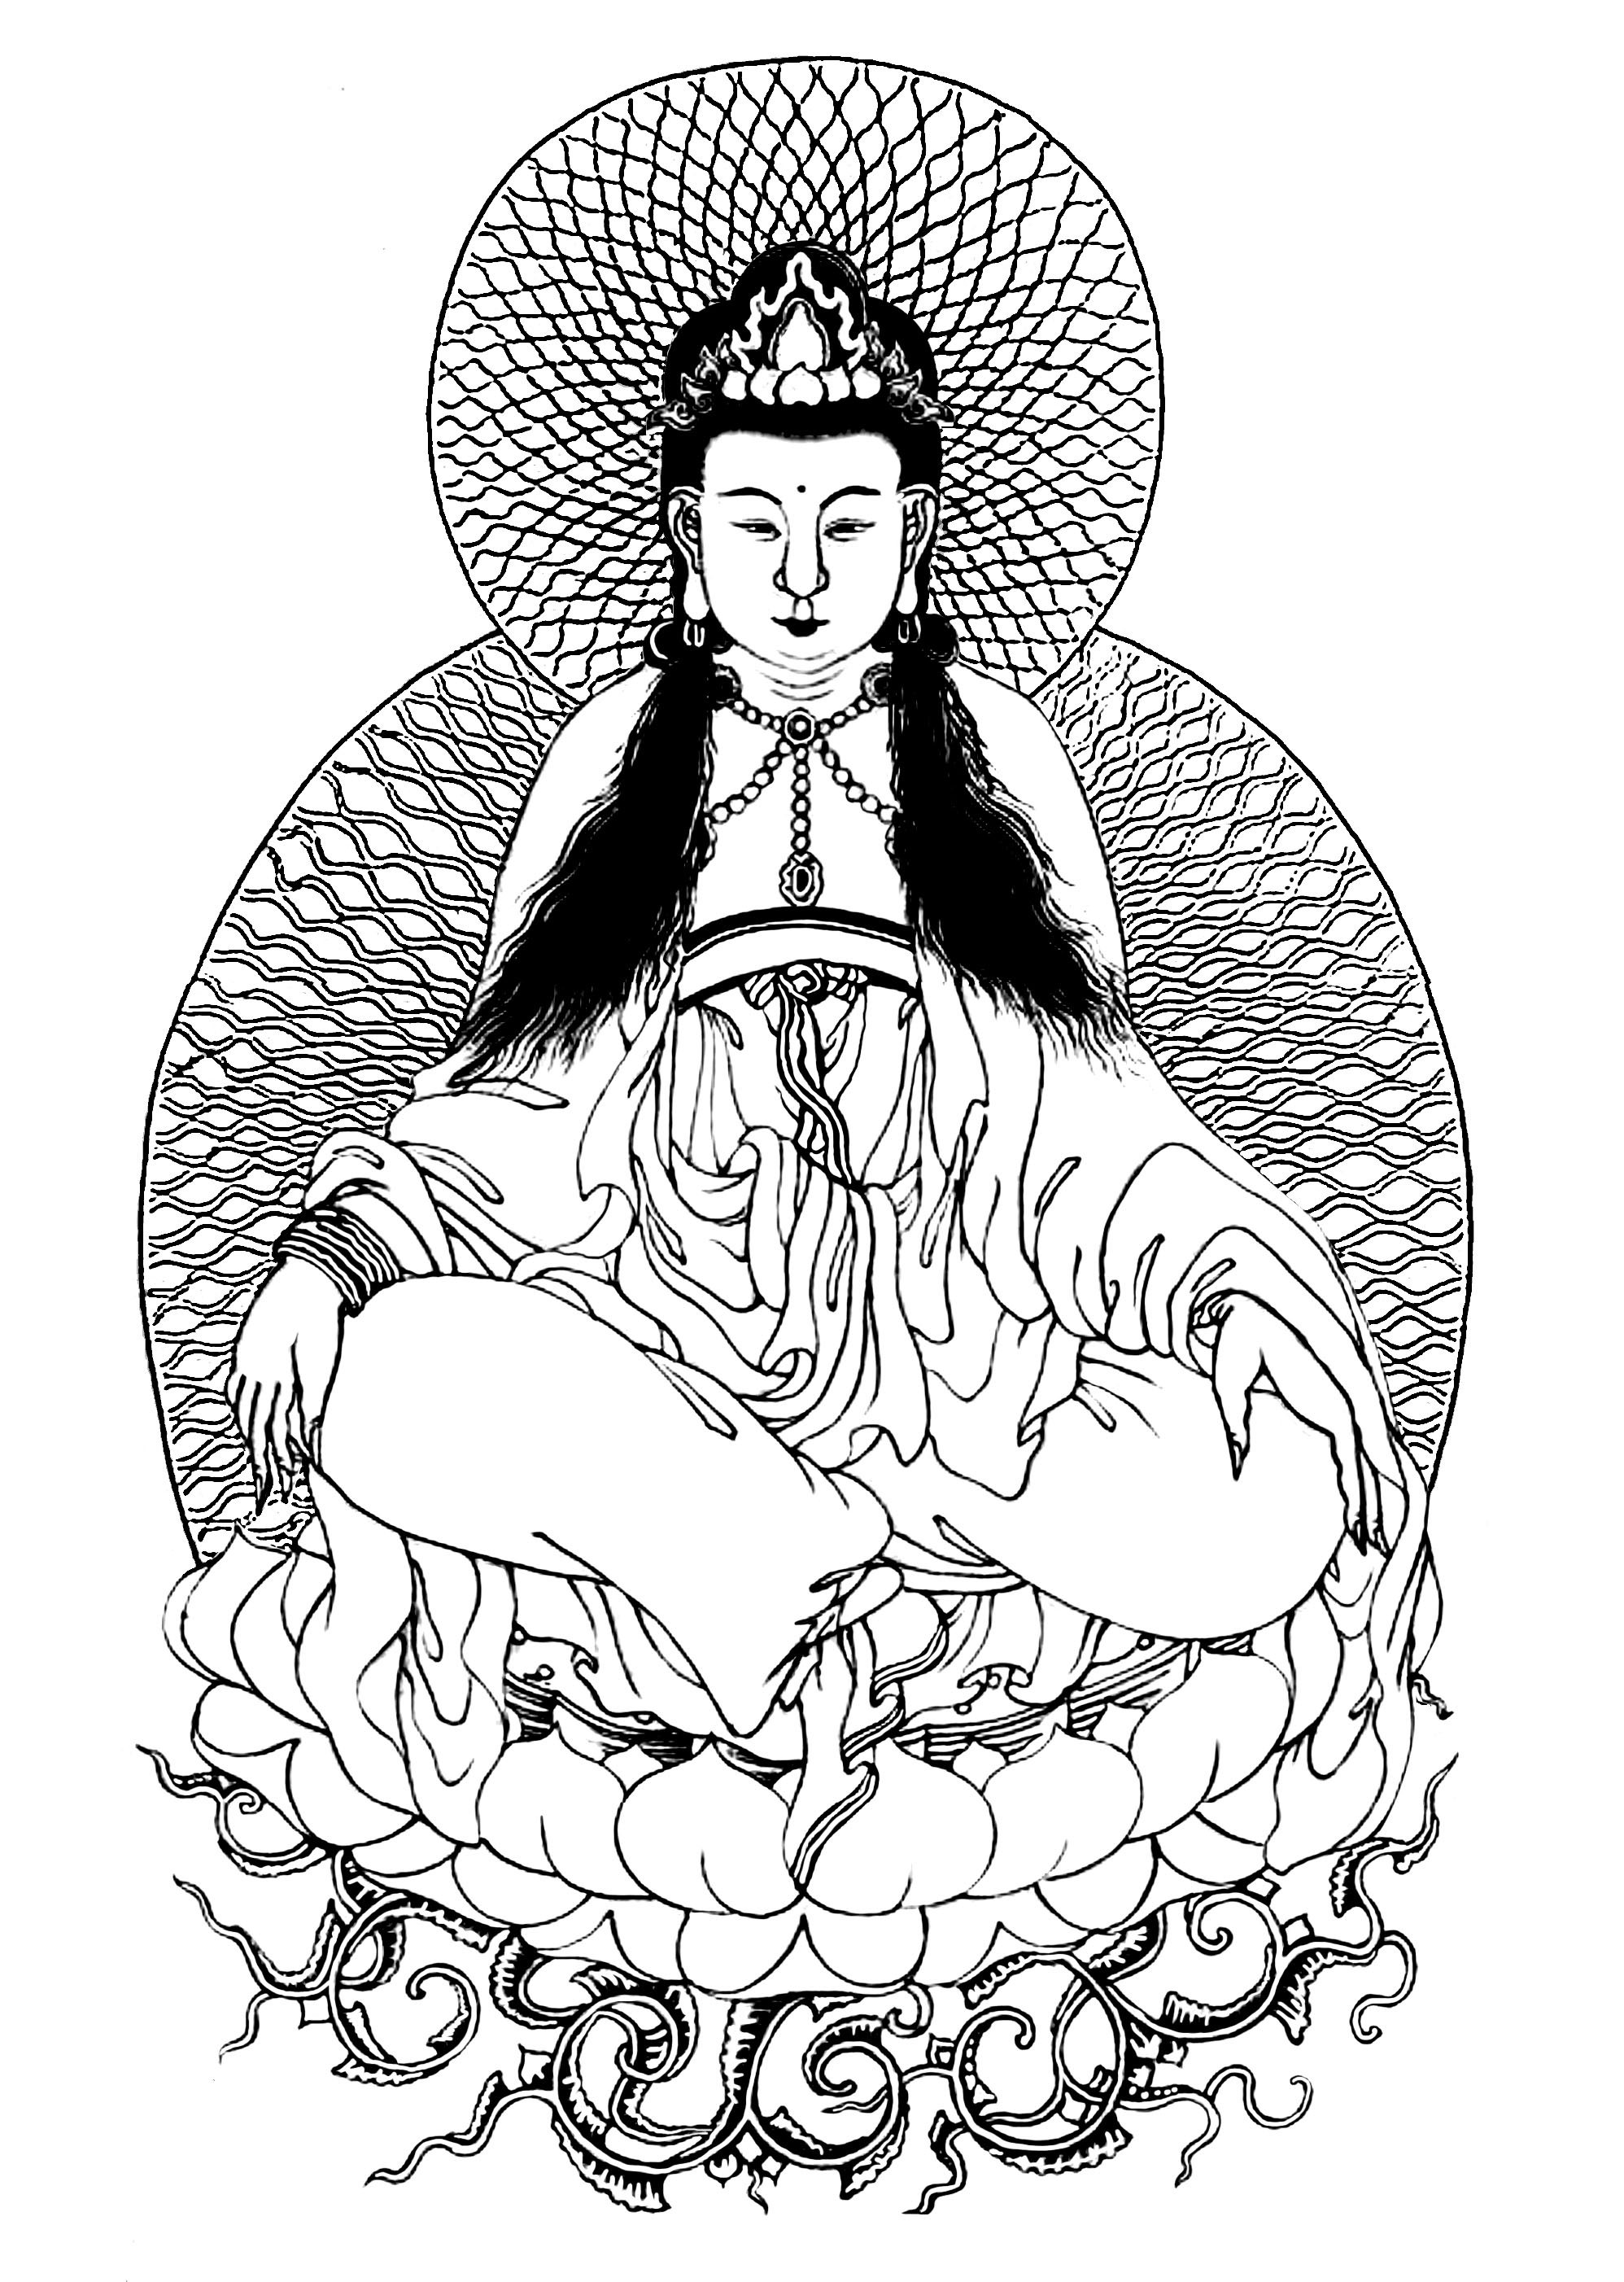 Guanyn: The Buddhist Goddess of Mercy. Coloring inspired by a painting by Xingru Wang